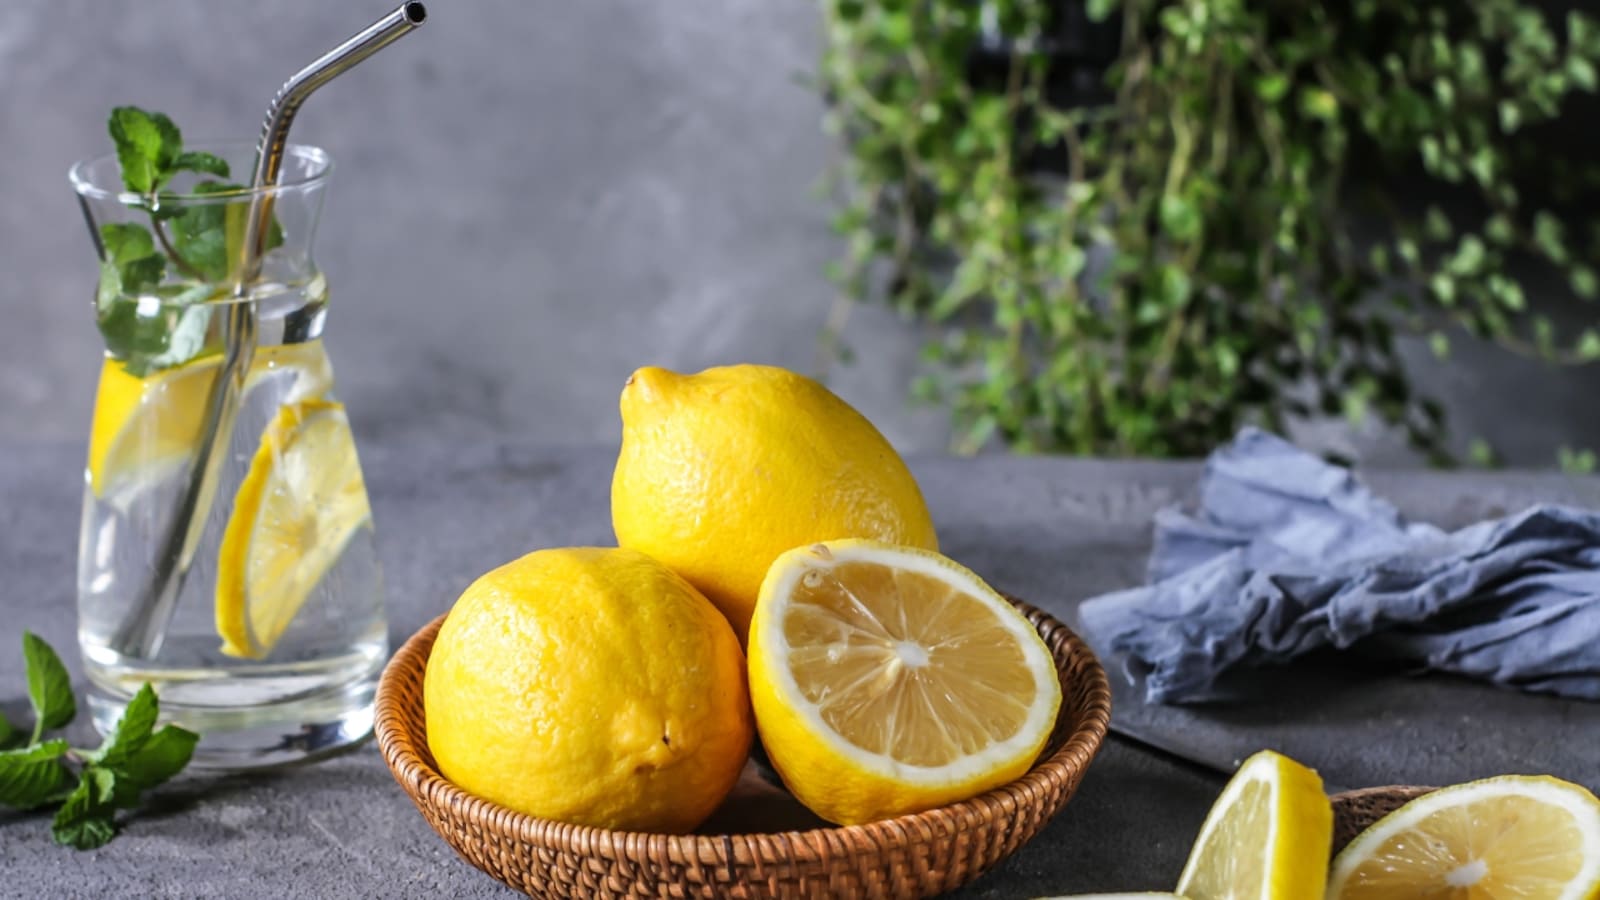 Lemon water benefits: A refreshing drink loaded with Vitamin C and  antioxidants